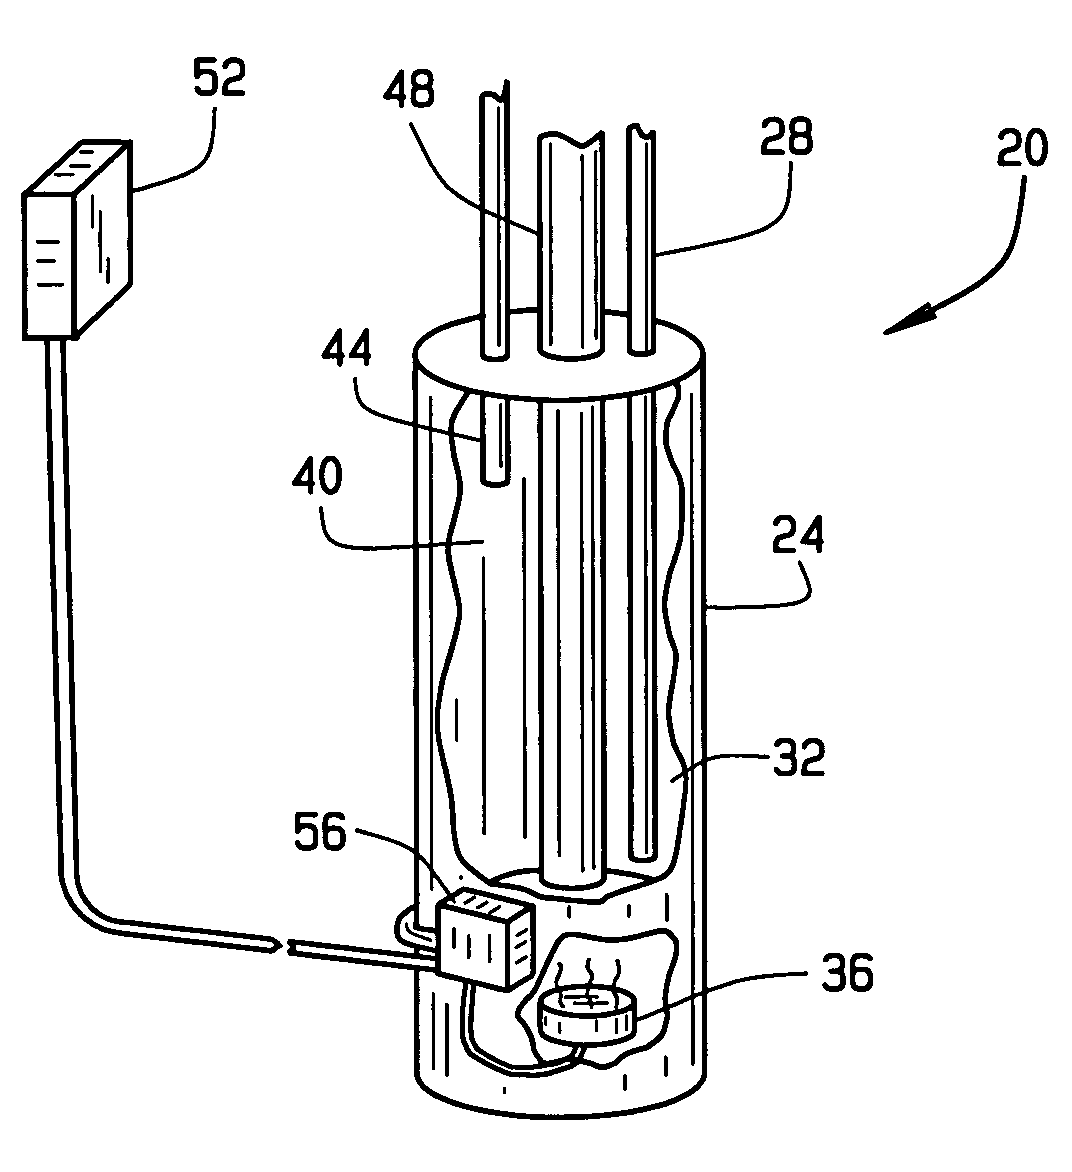 Apparatus and methods for operating a gas valve